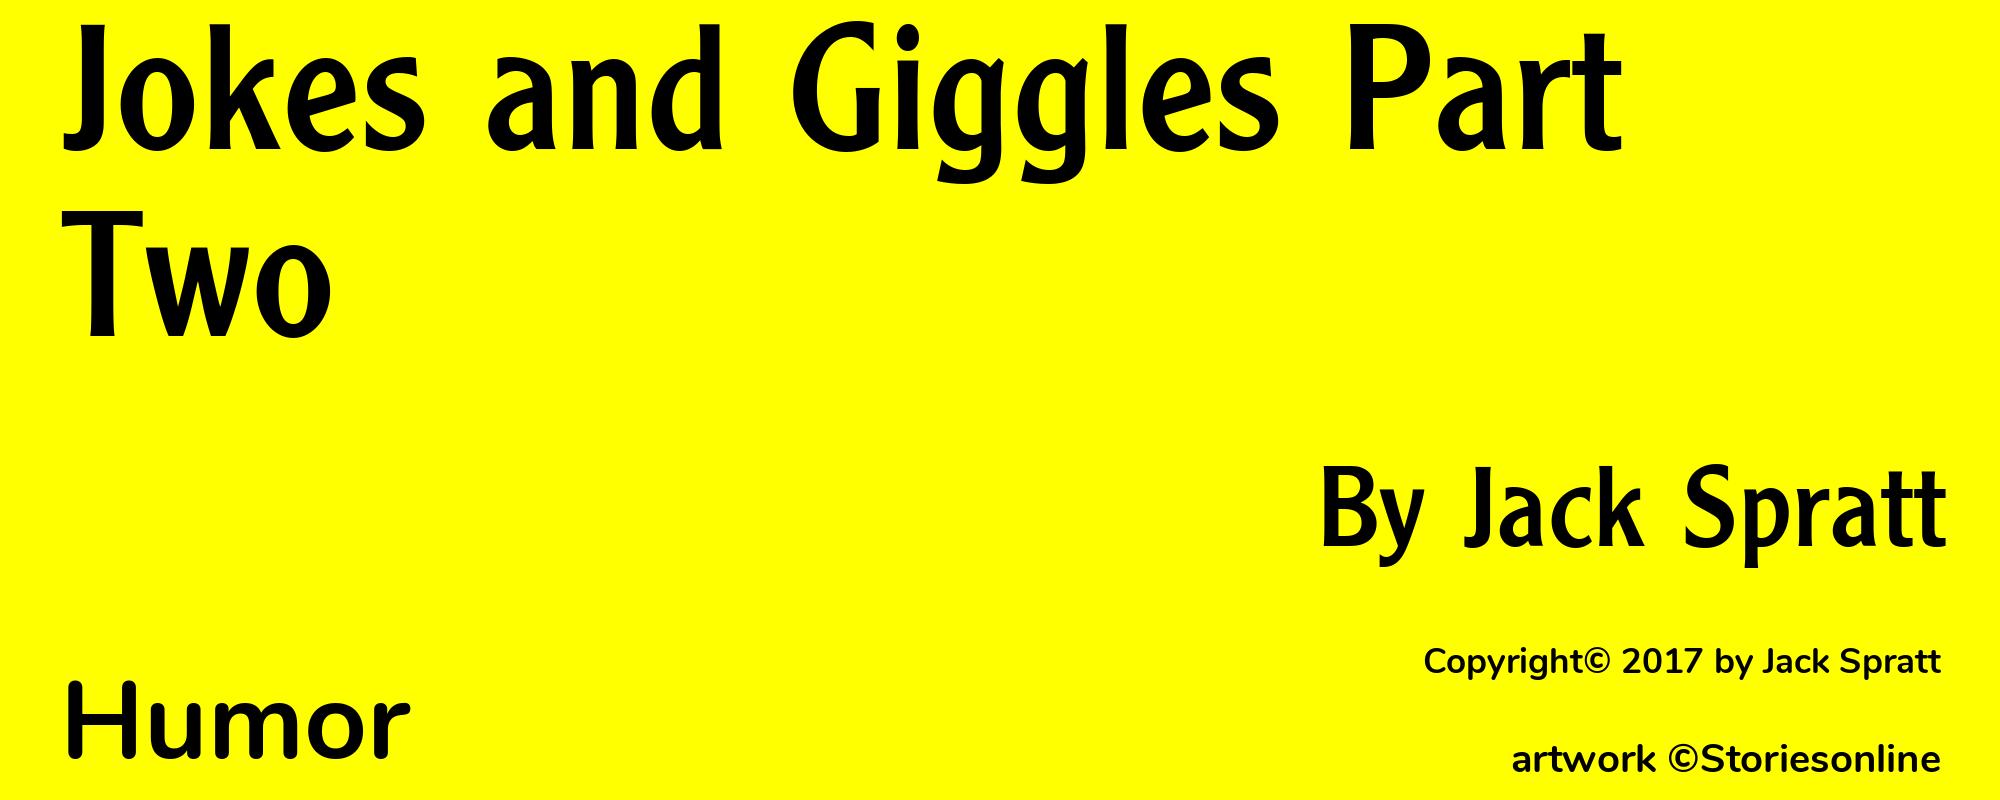 Jokes and Giggles Part Two - Cover